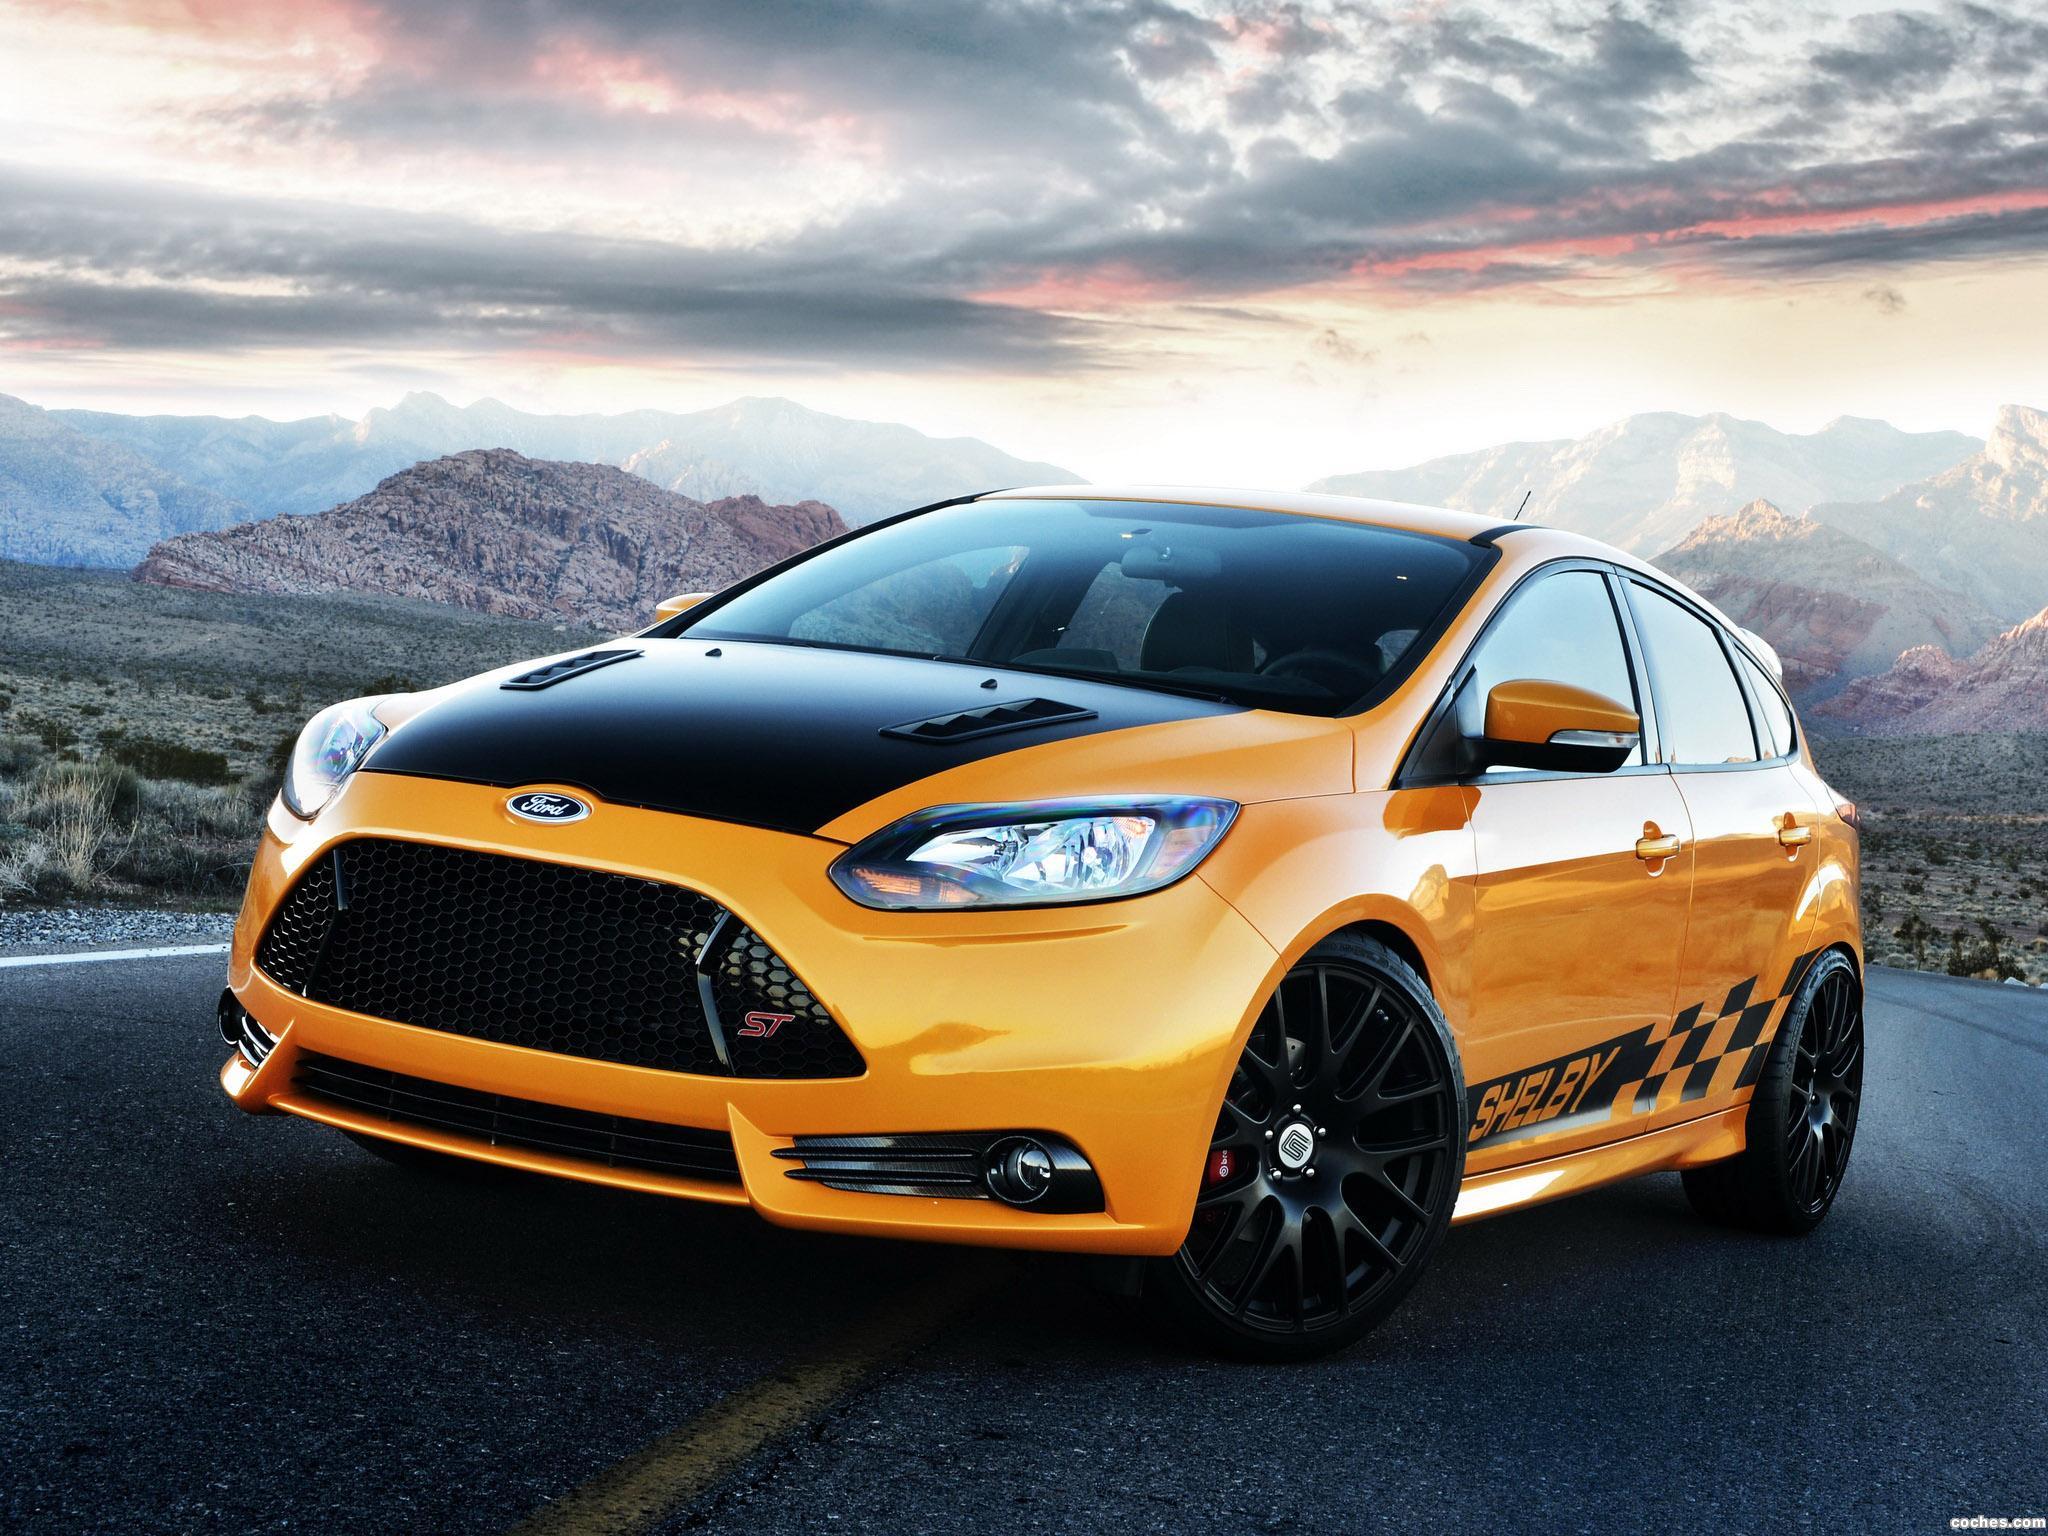 shelby_ford-focus-st-2013_r1